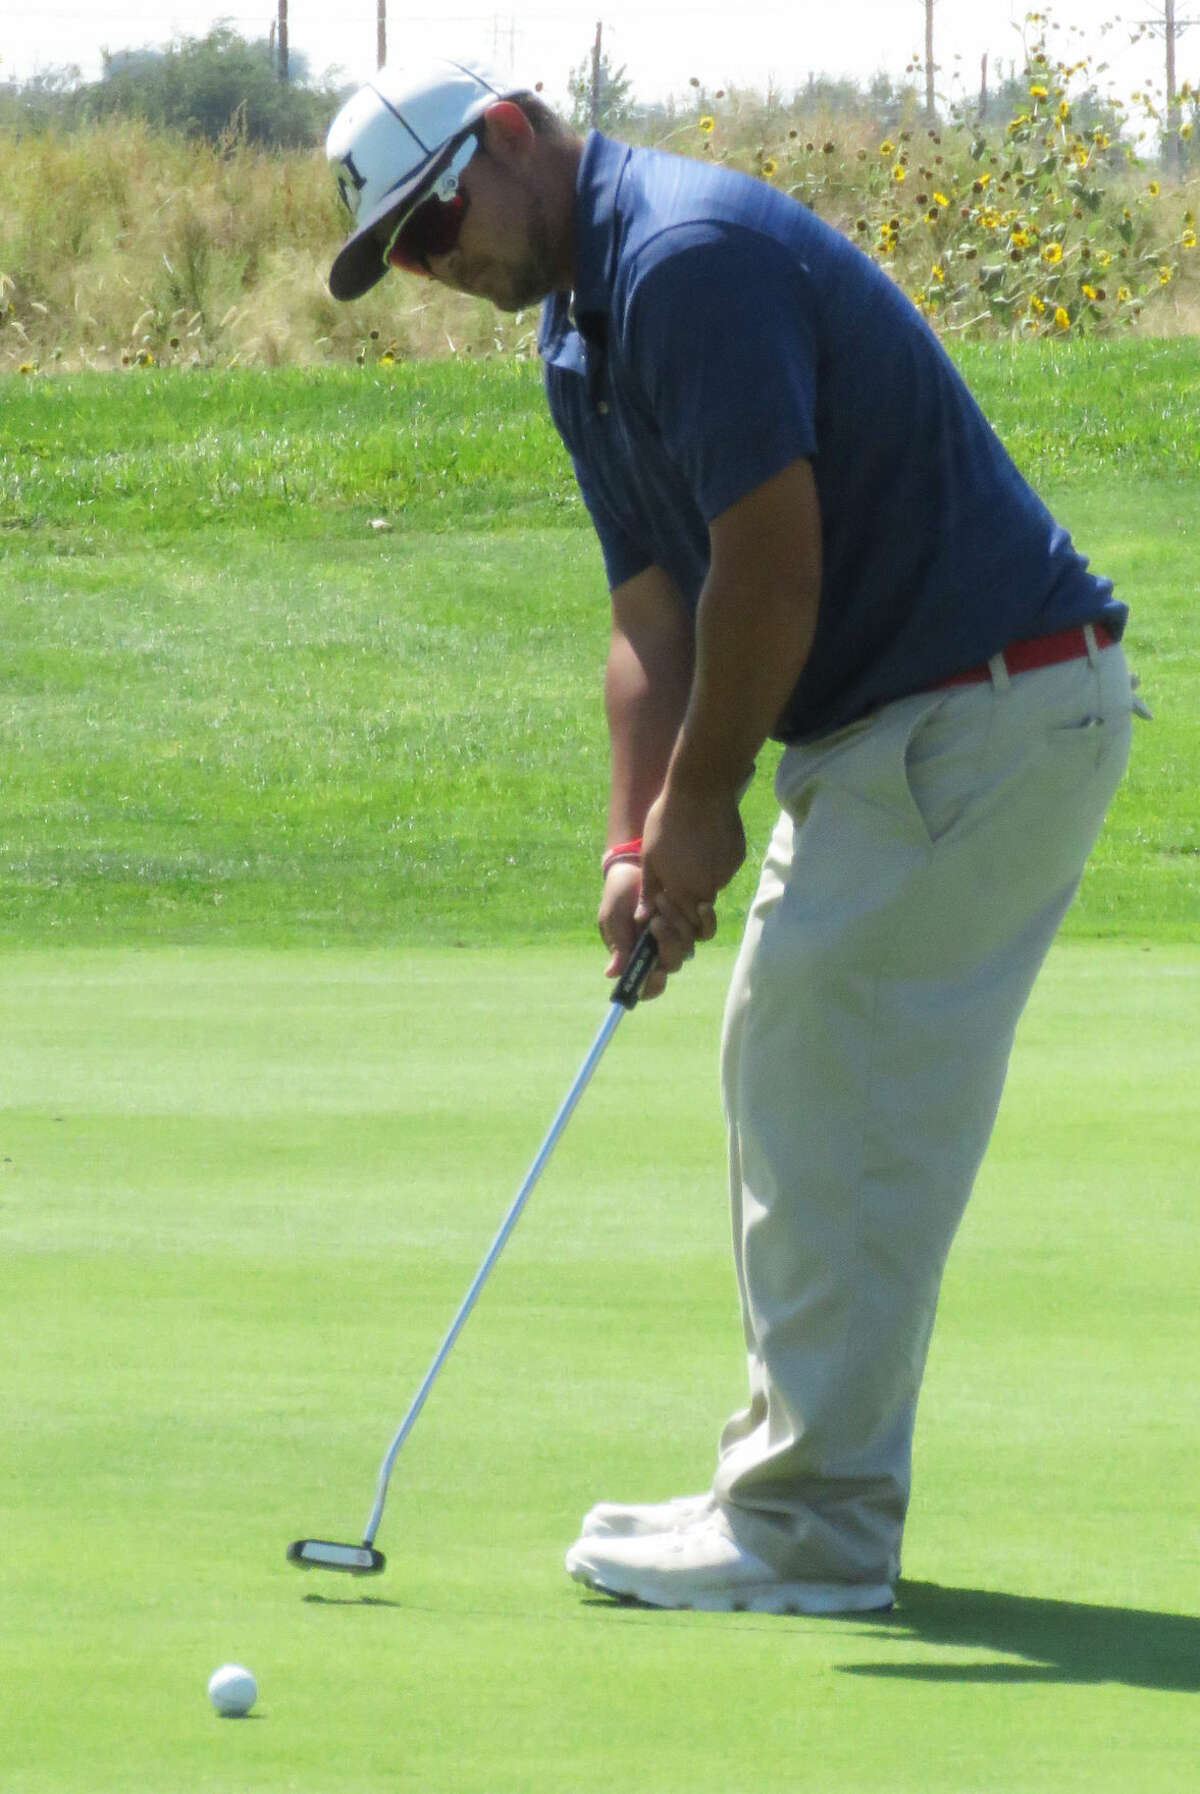 Plainview's Troy Velasquez putts the ball during the Amarillo Triangular at Comanche Golf Course Saturday. Velasquez was one of three Bulldogs to shoot a 74 as they finished with a 294 team score, which was the low score of all teams for the day.